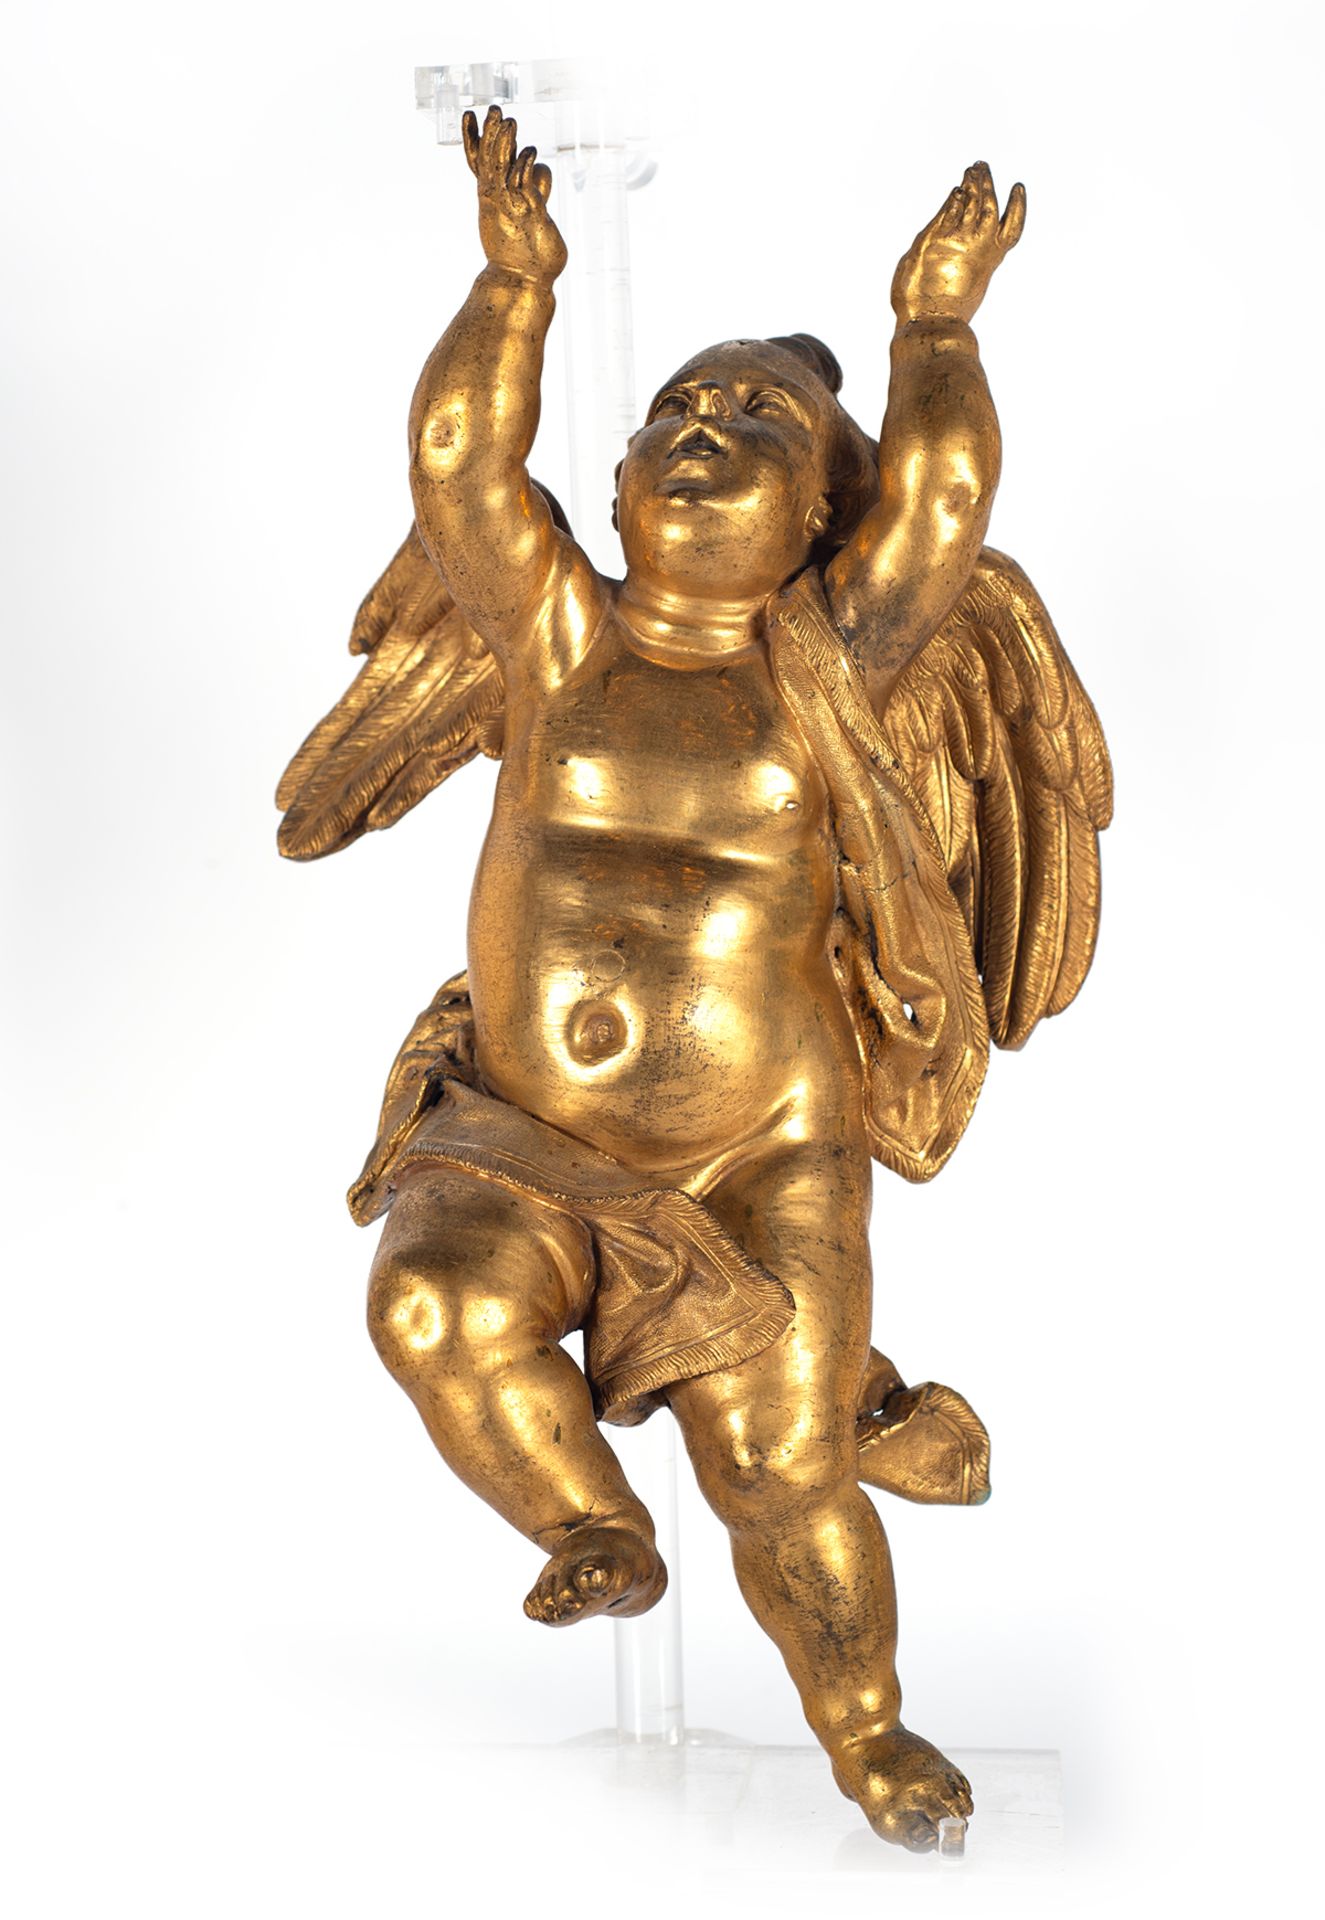 Exceptional pair of angels in gilded bronze, 16th-17th century - Image 5 of 11